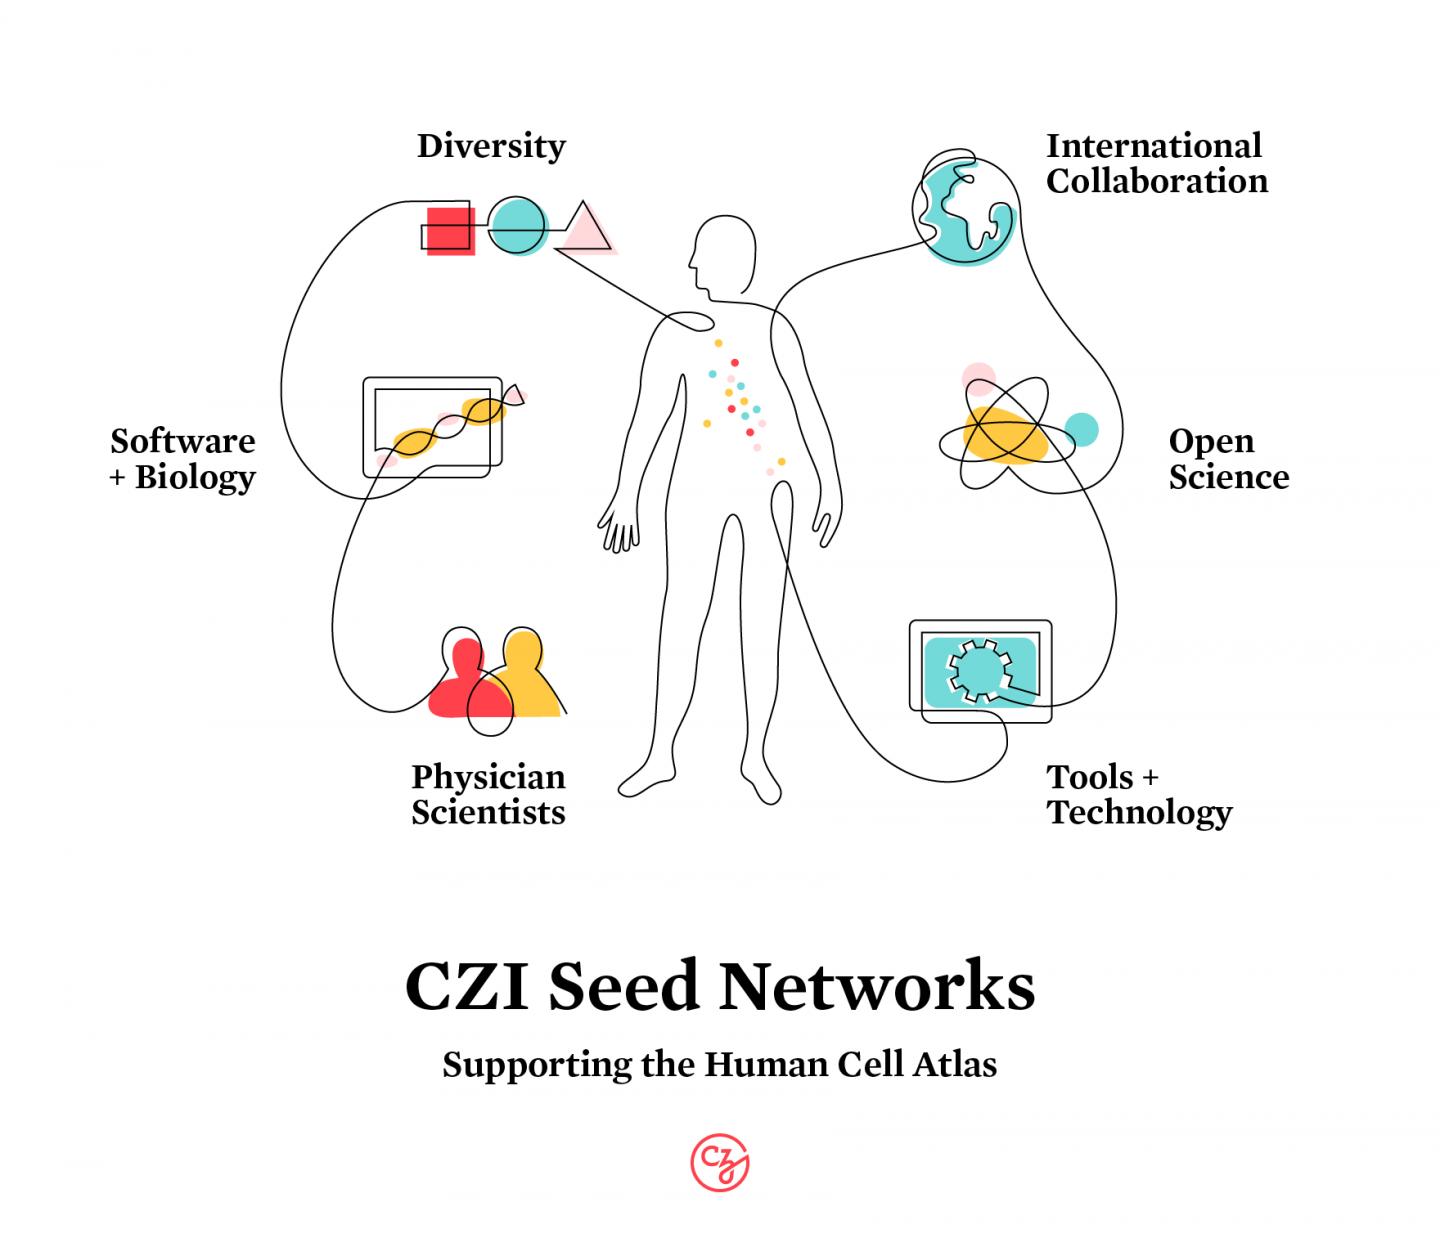 Chan Zuckerberg Initiative Seed Networks for the Human Cell Atlas